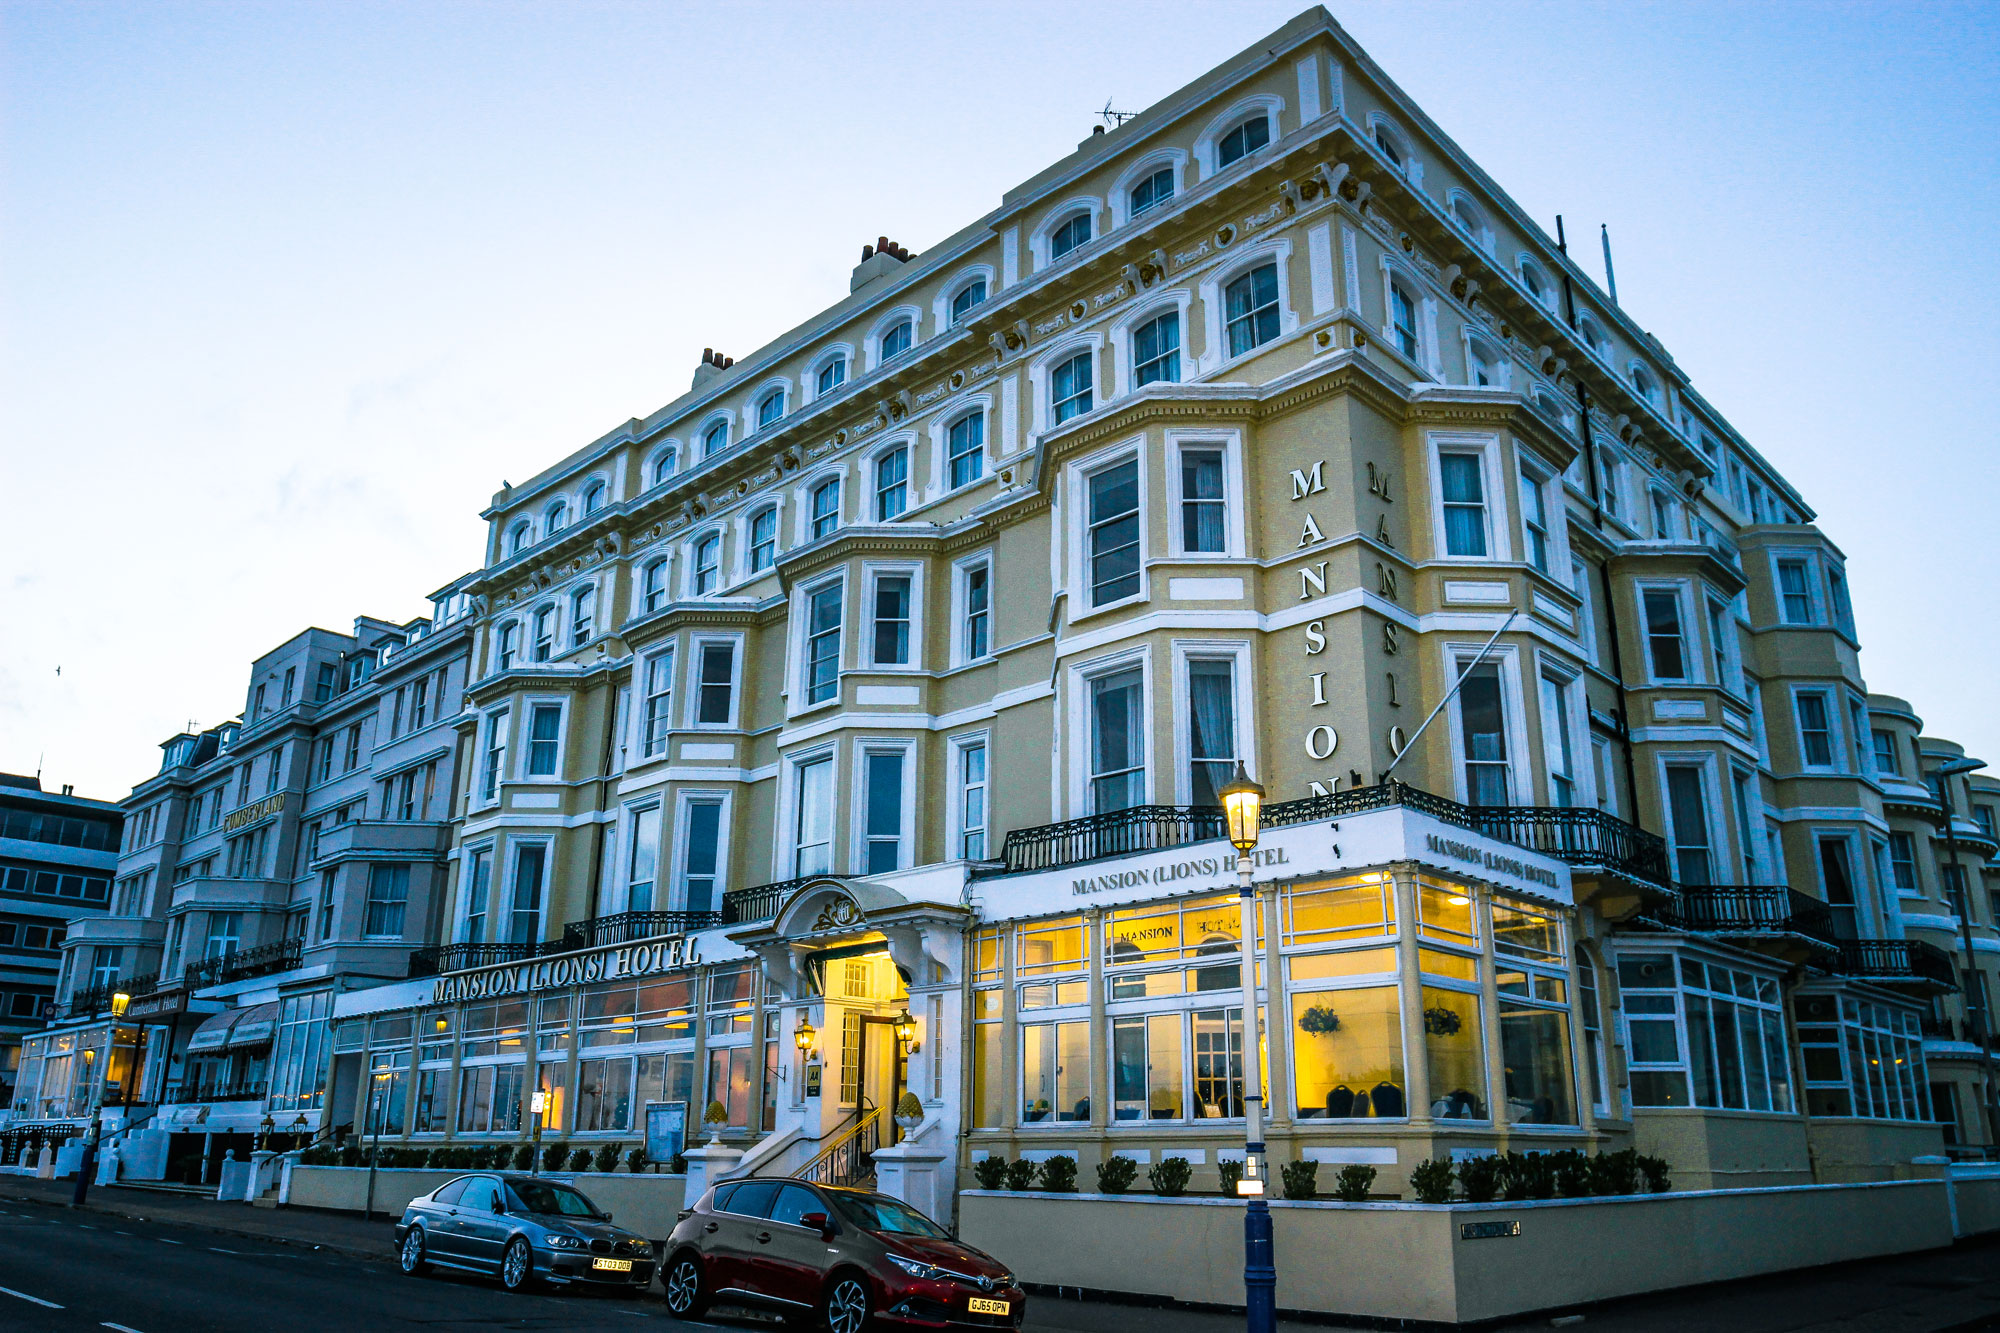 Picture of the Mansion Hotel Eastbourne, East Sussex - Lions Group